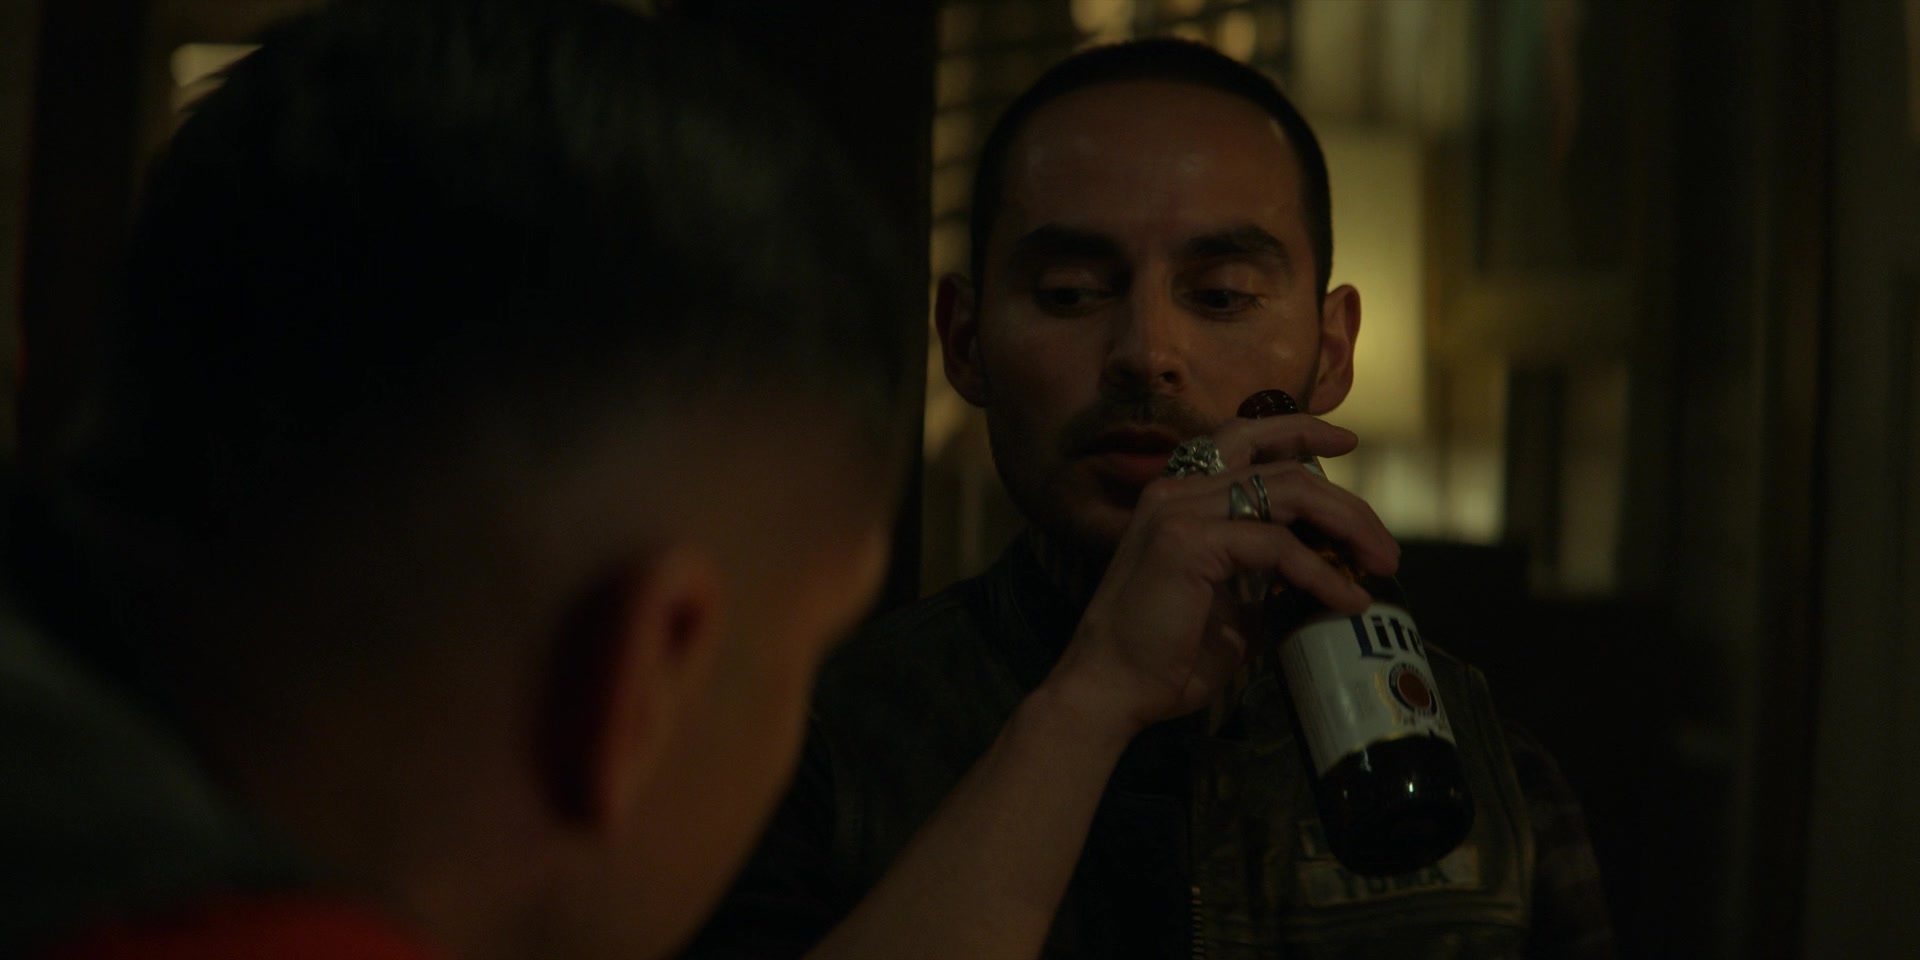 Miller Lite Beer Bottles In Mayans M.C. S04E08 "The Righteous Wrath Of